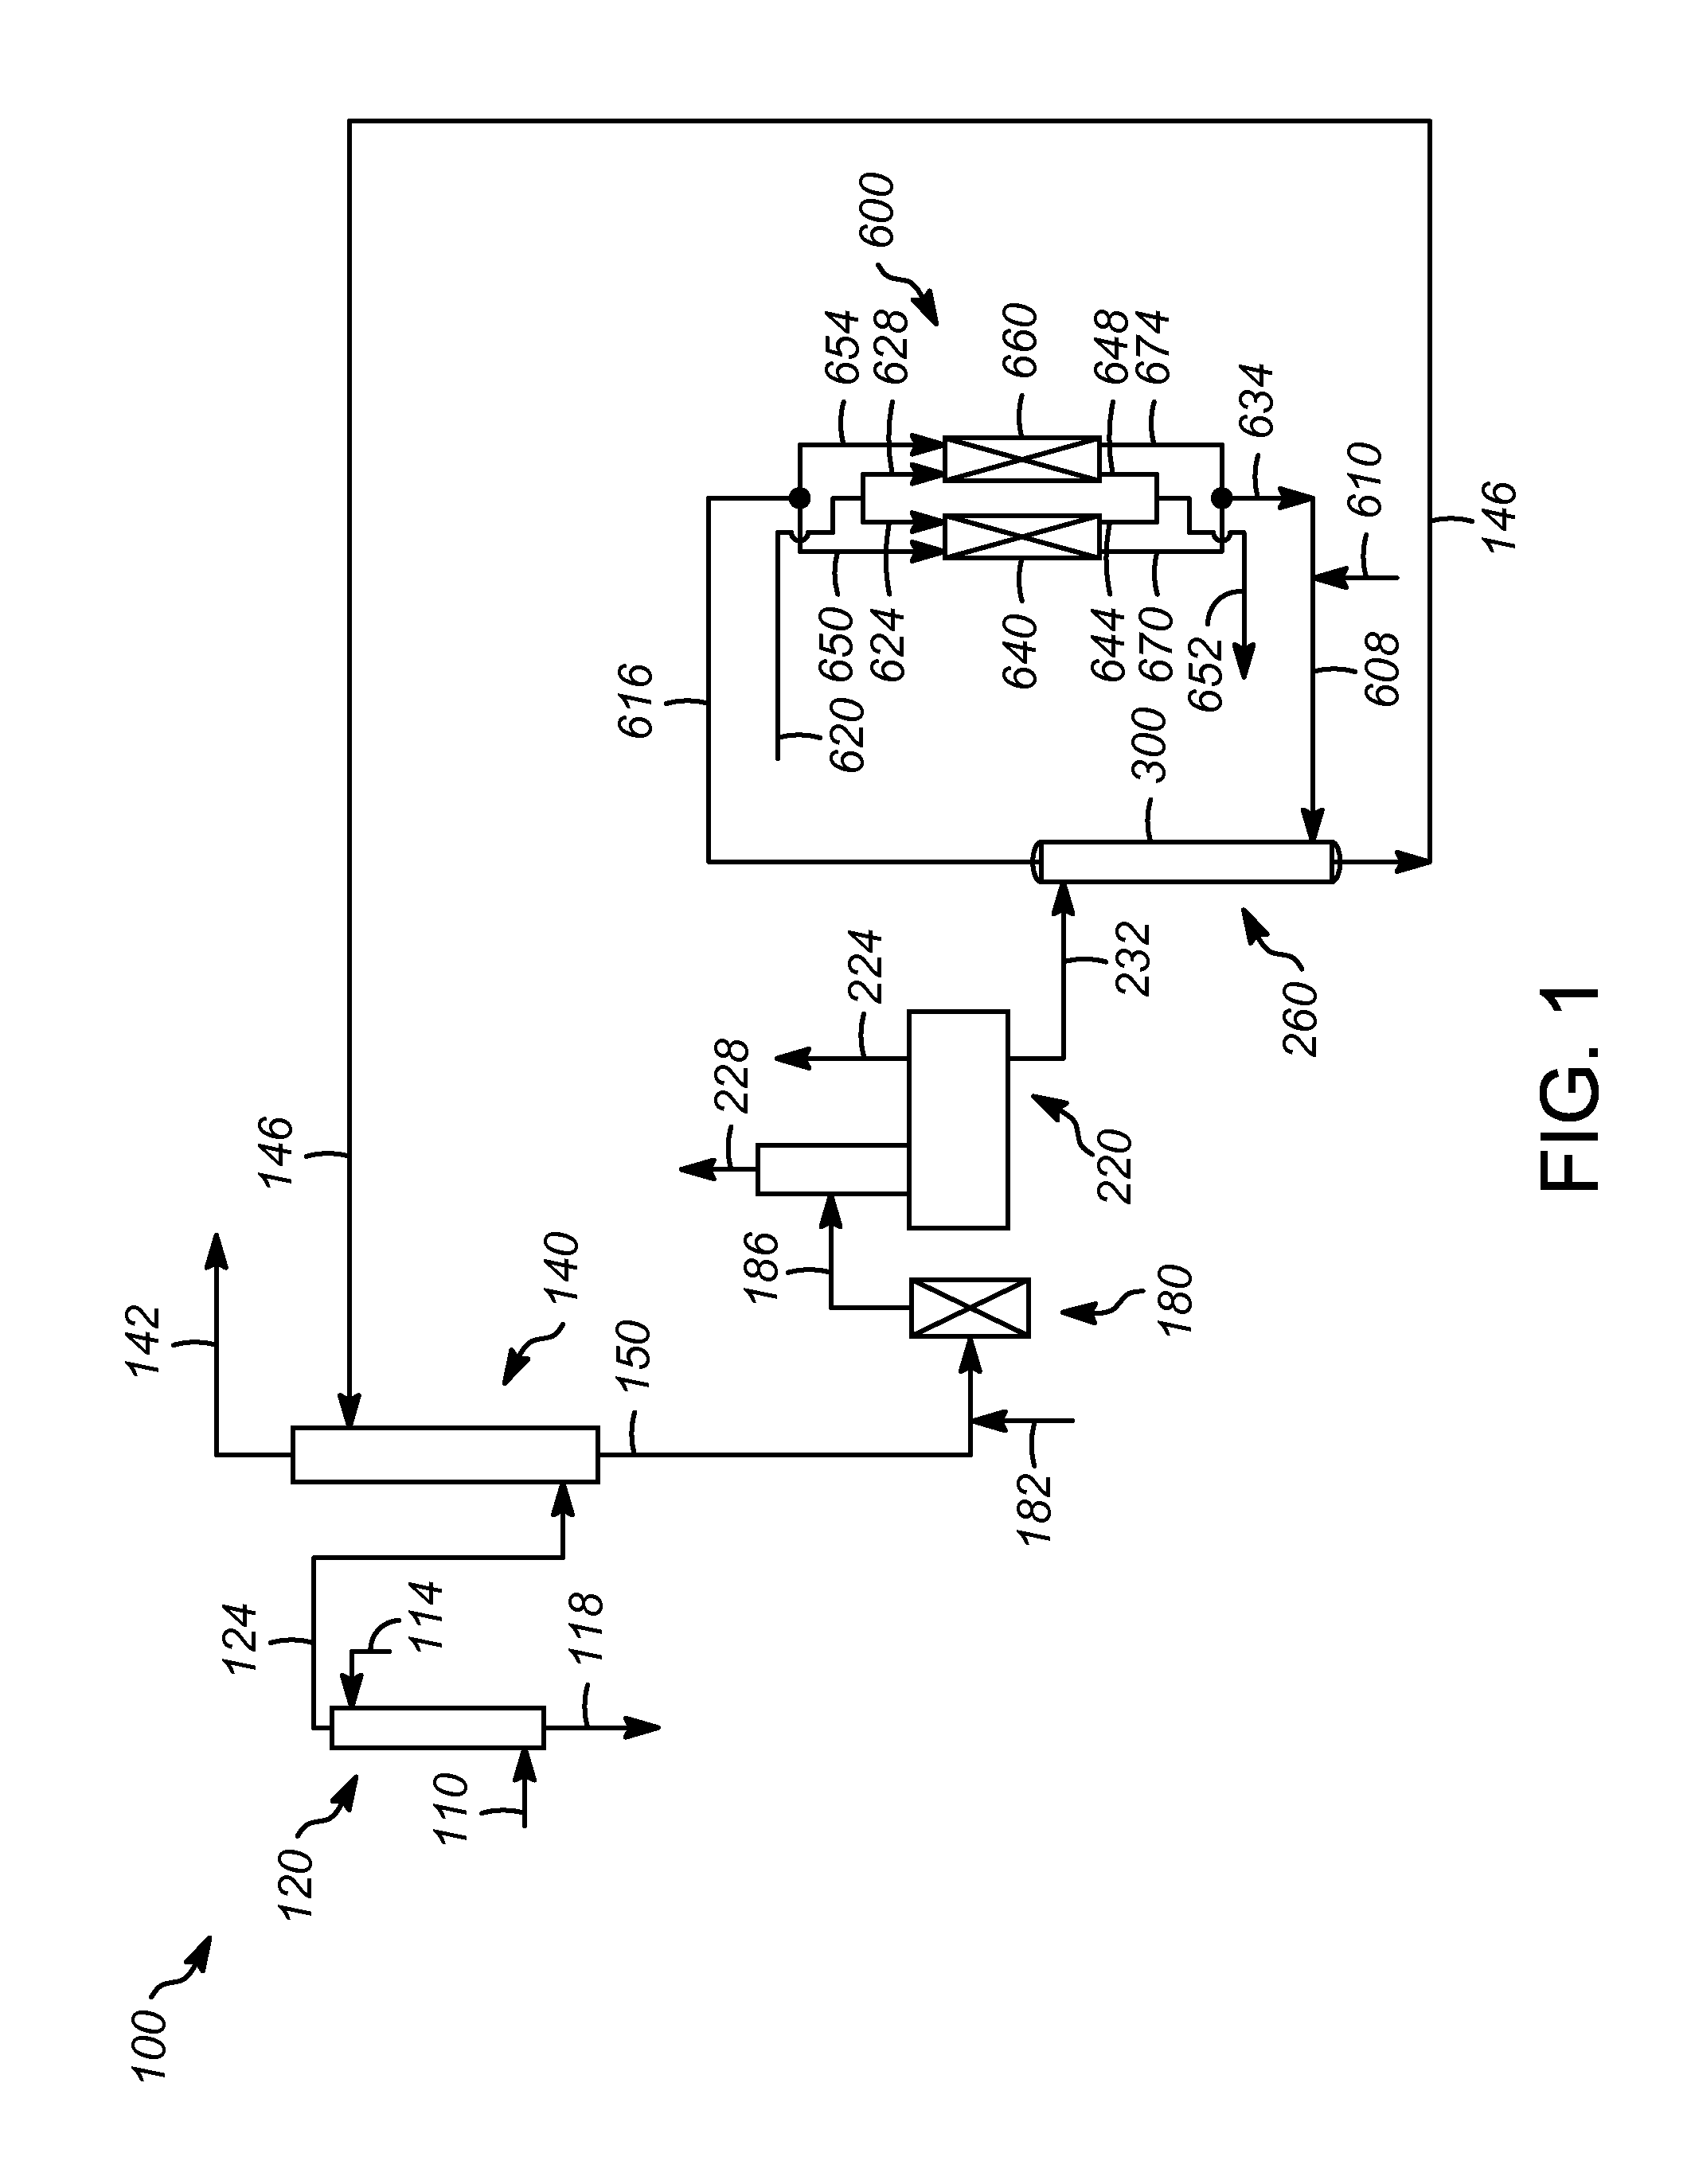 Process for removing one or more sulfur compounds from a stream